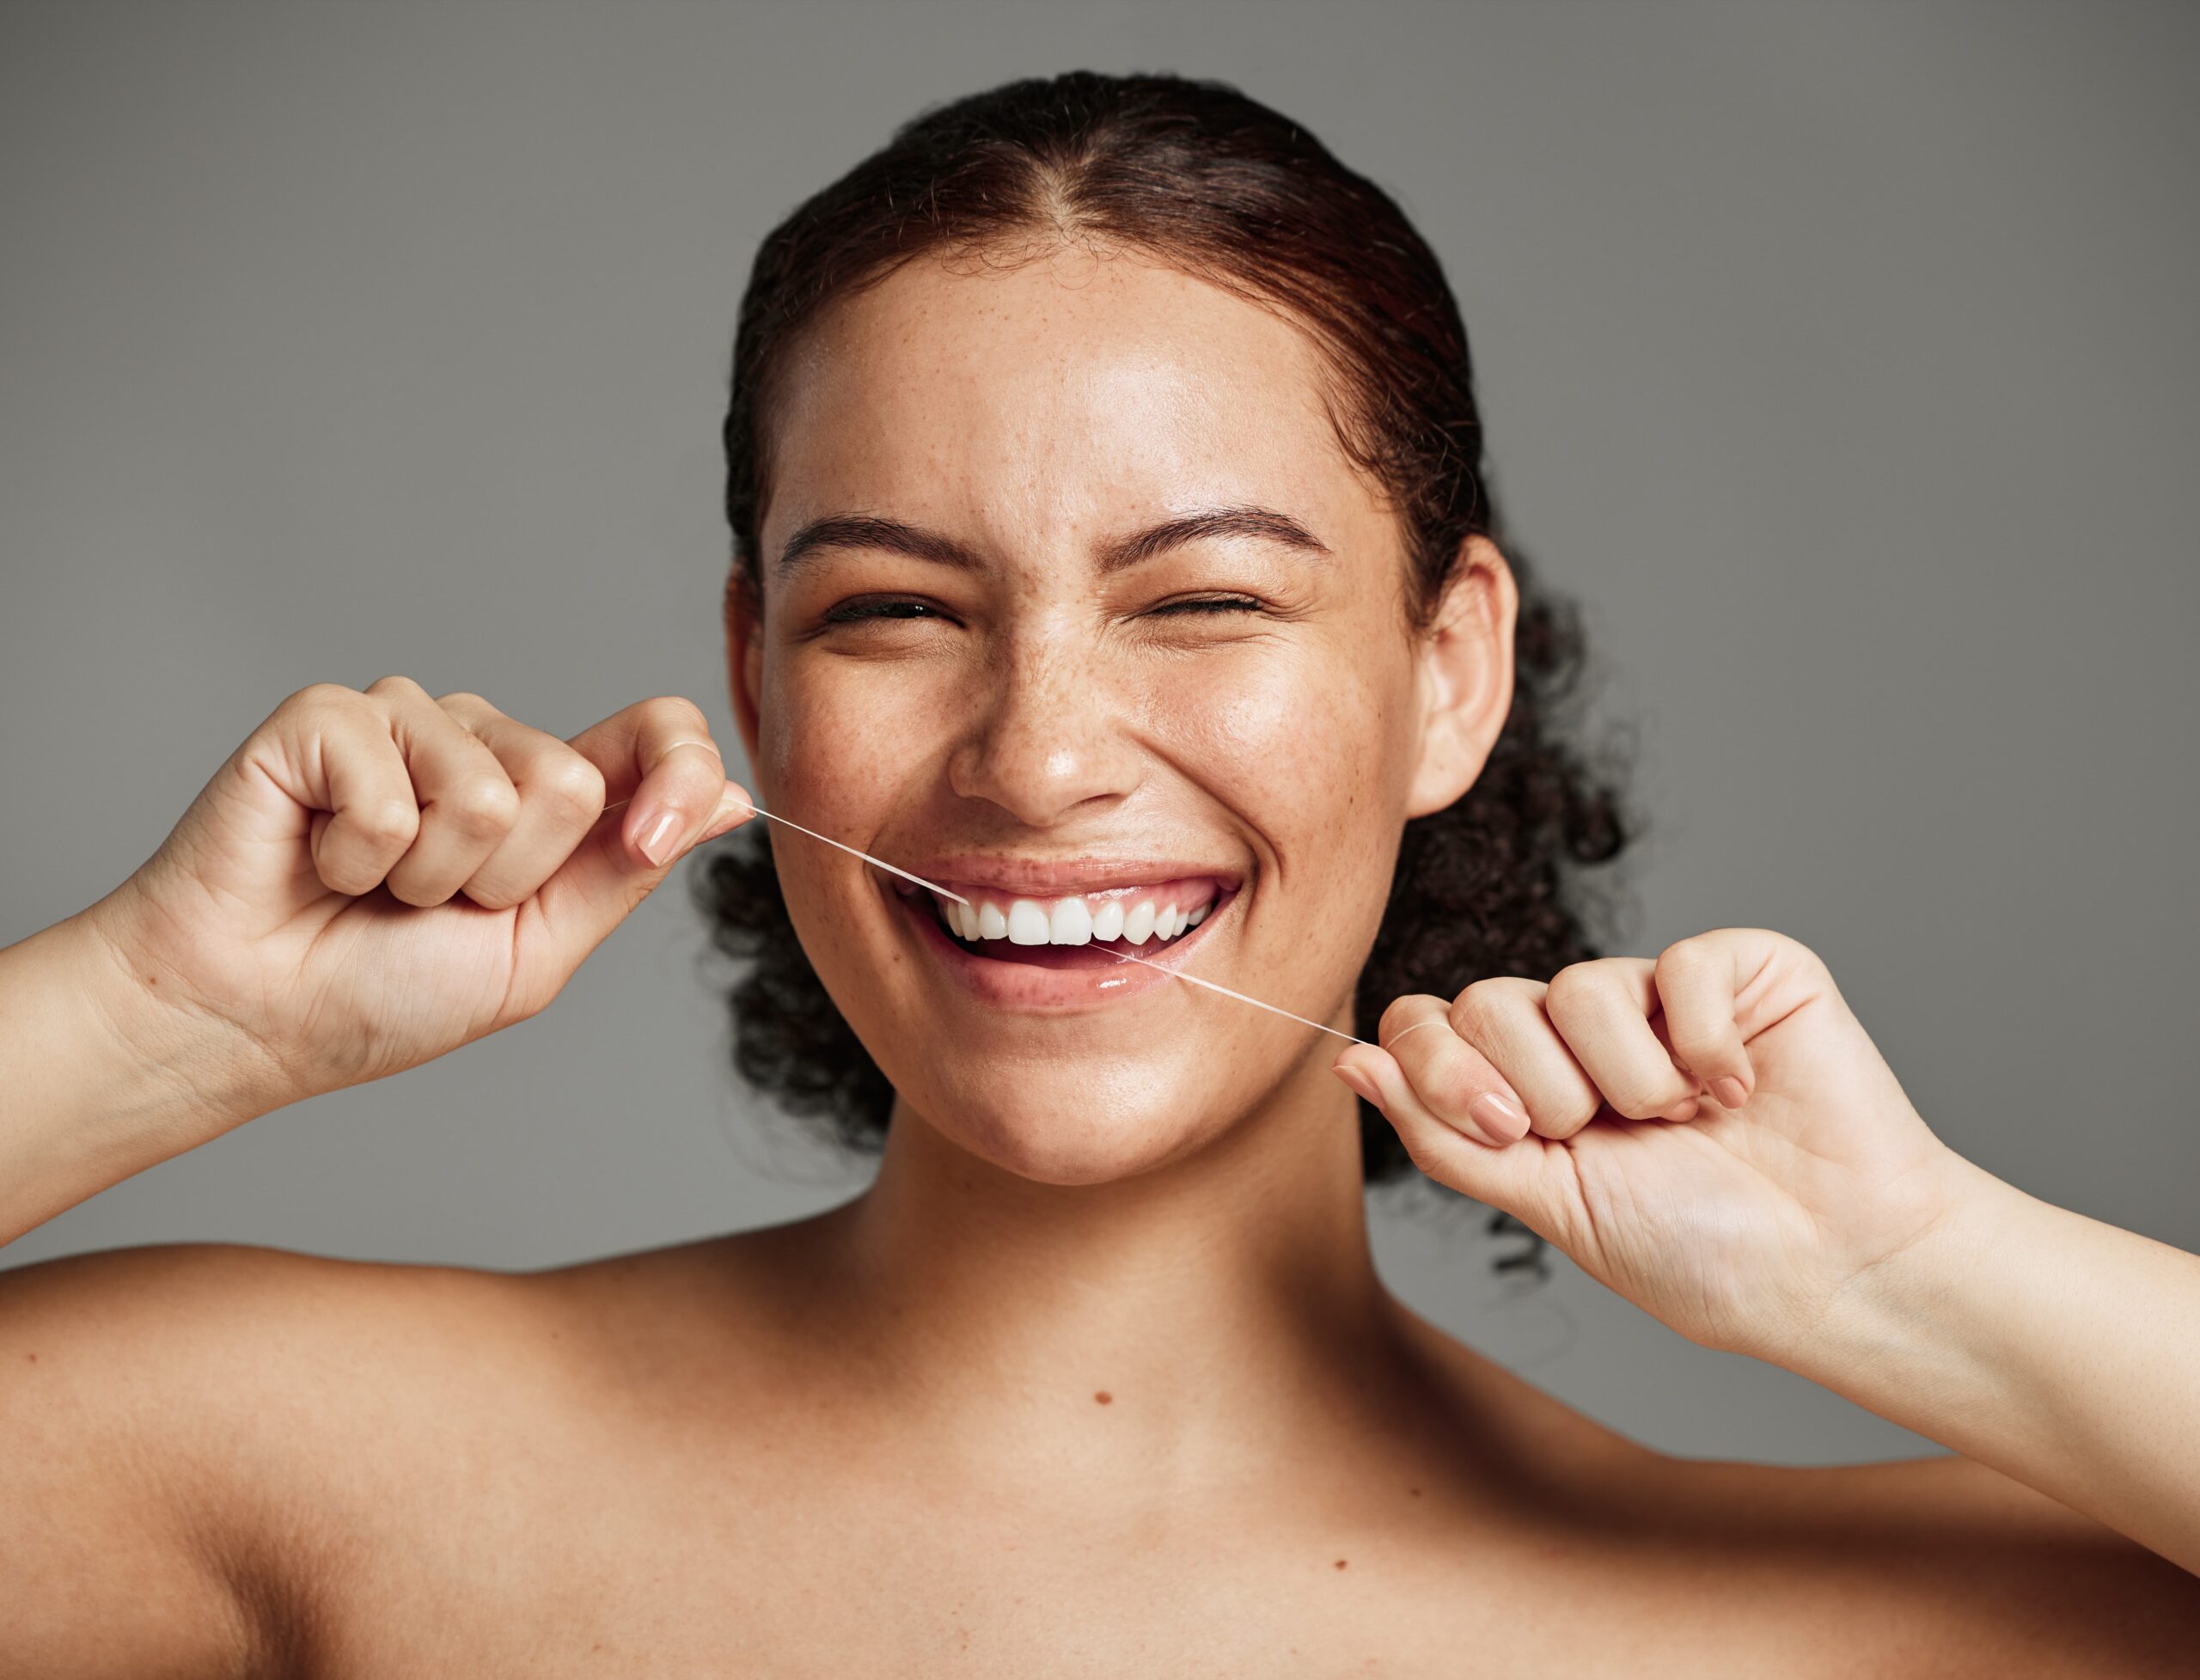 woman with a smile flossing teeth